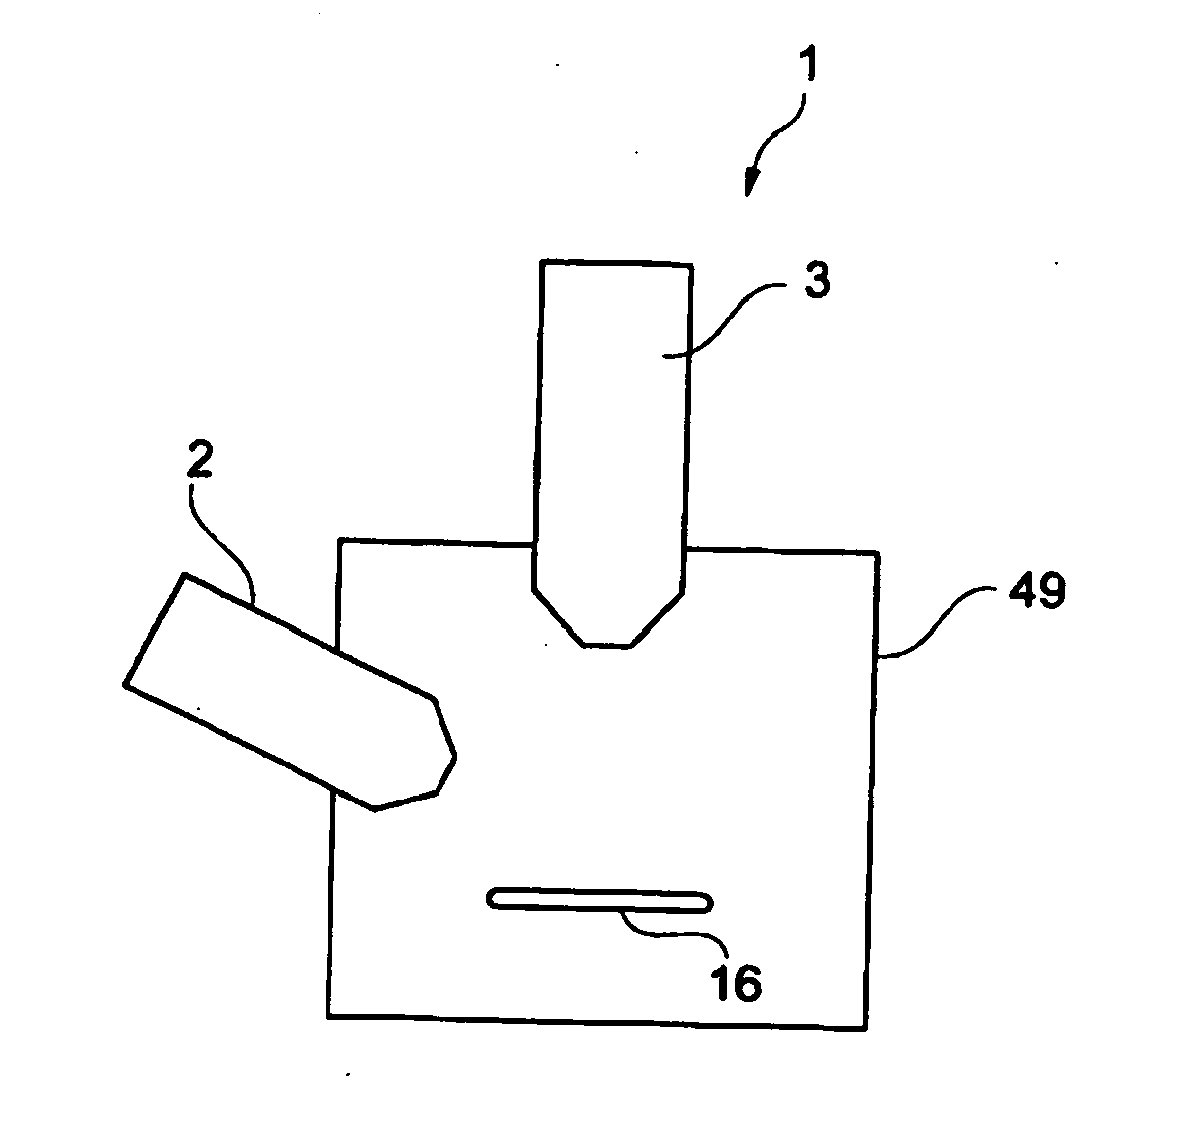 Apparatus for focusing and for storage of ions and for separation of pressure areas